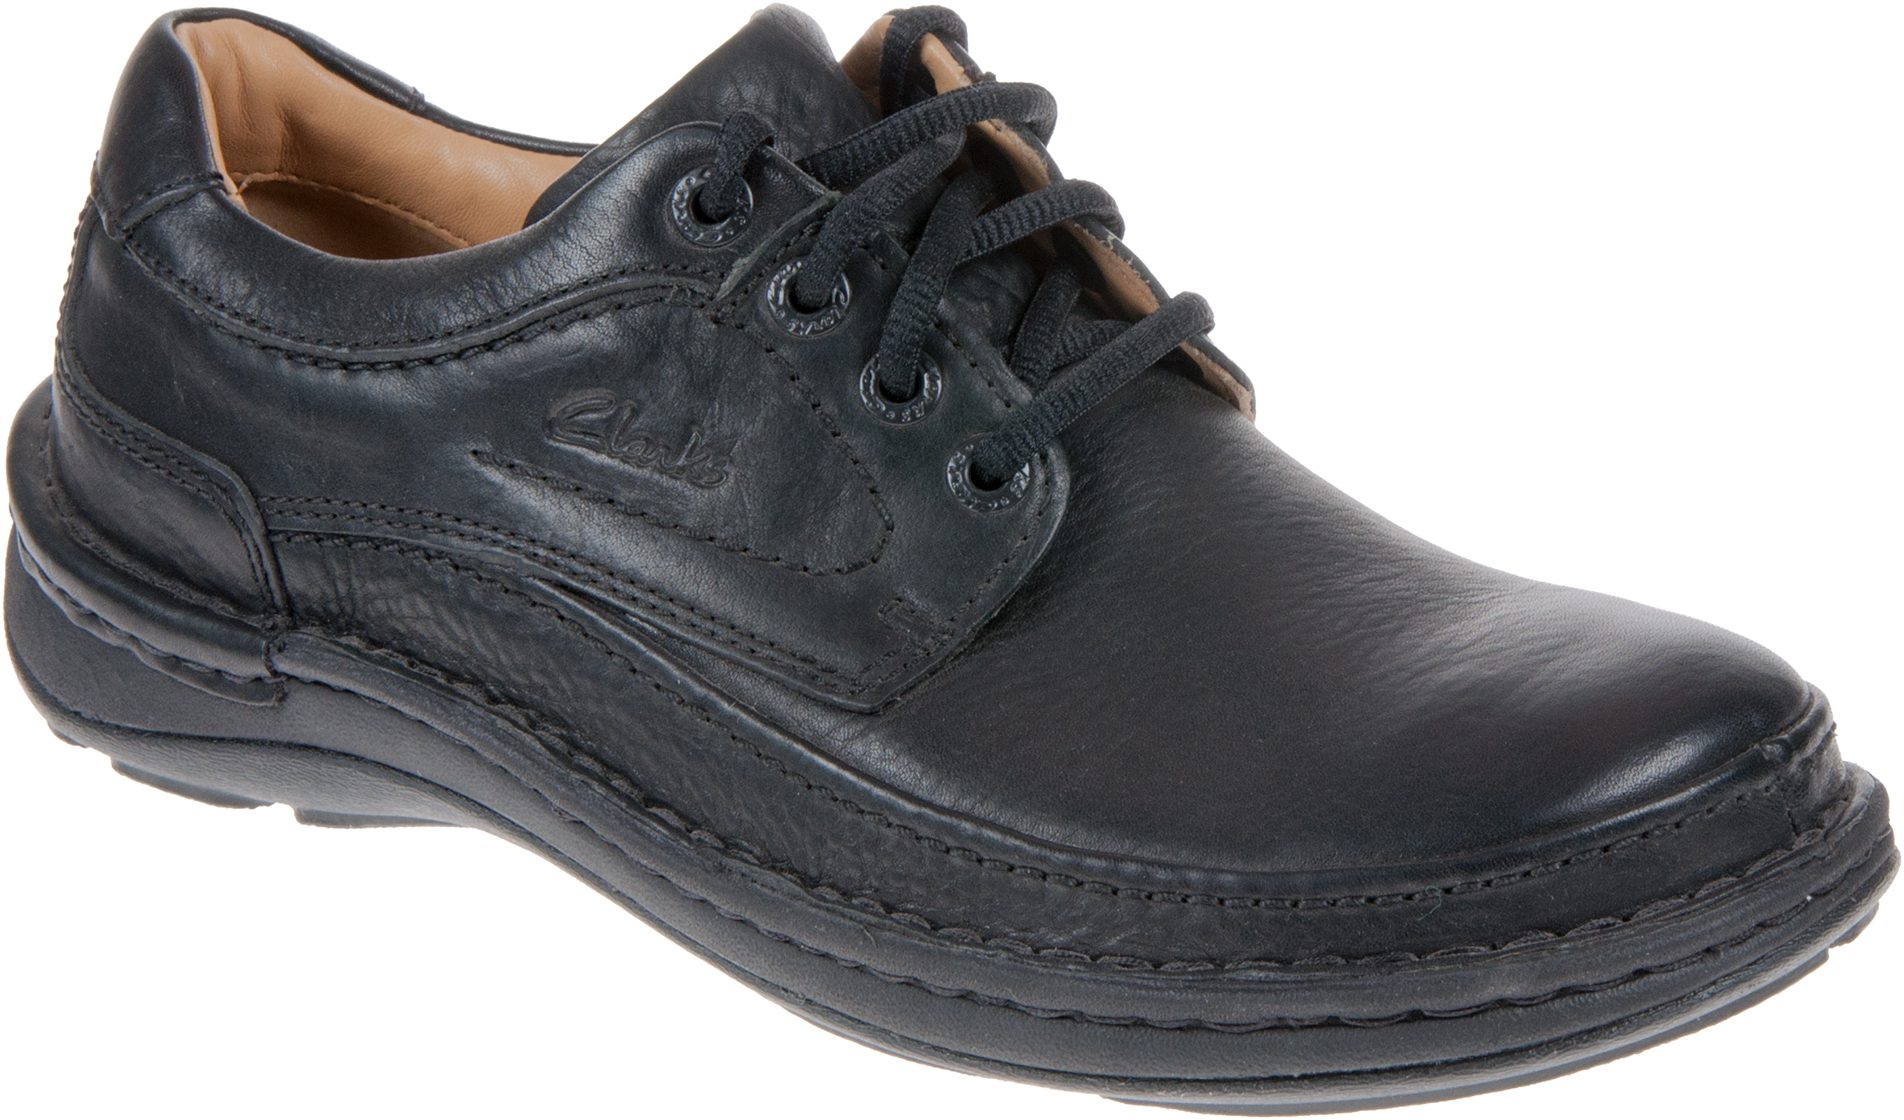 Clarks Nature Three Black Leather 20339008 - Formal Shoes - Humphries Shoes